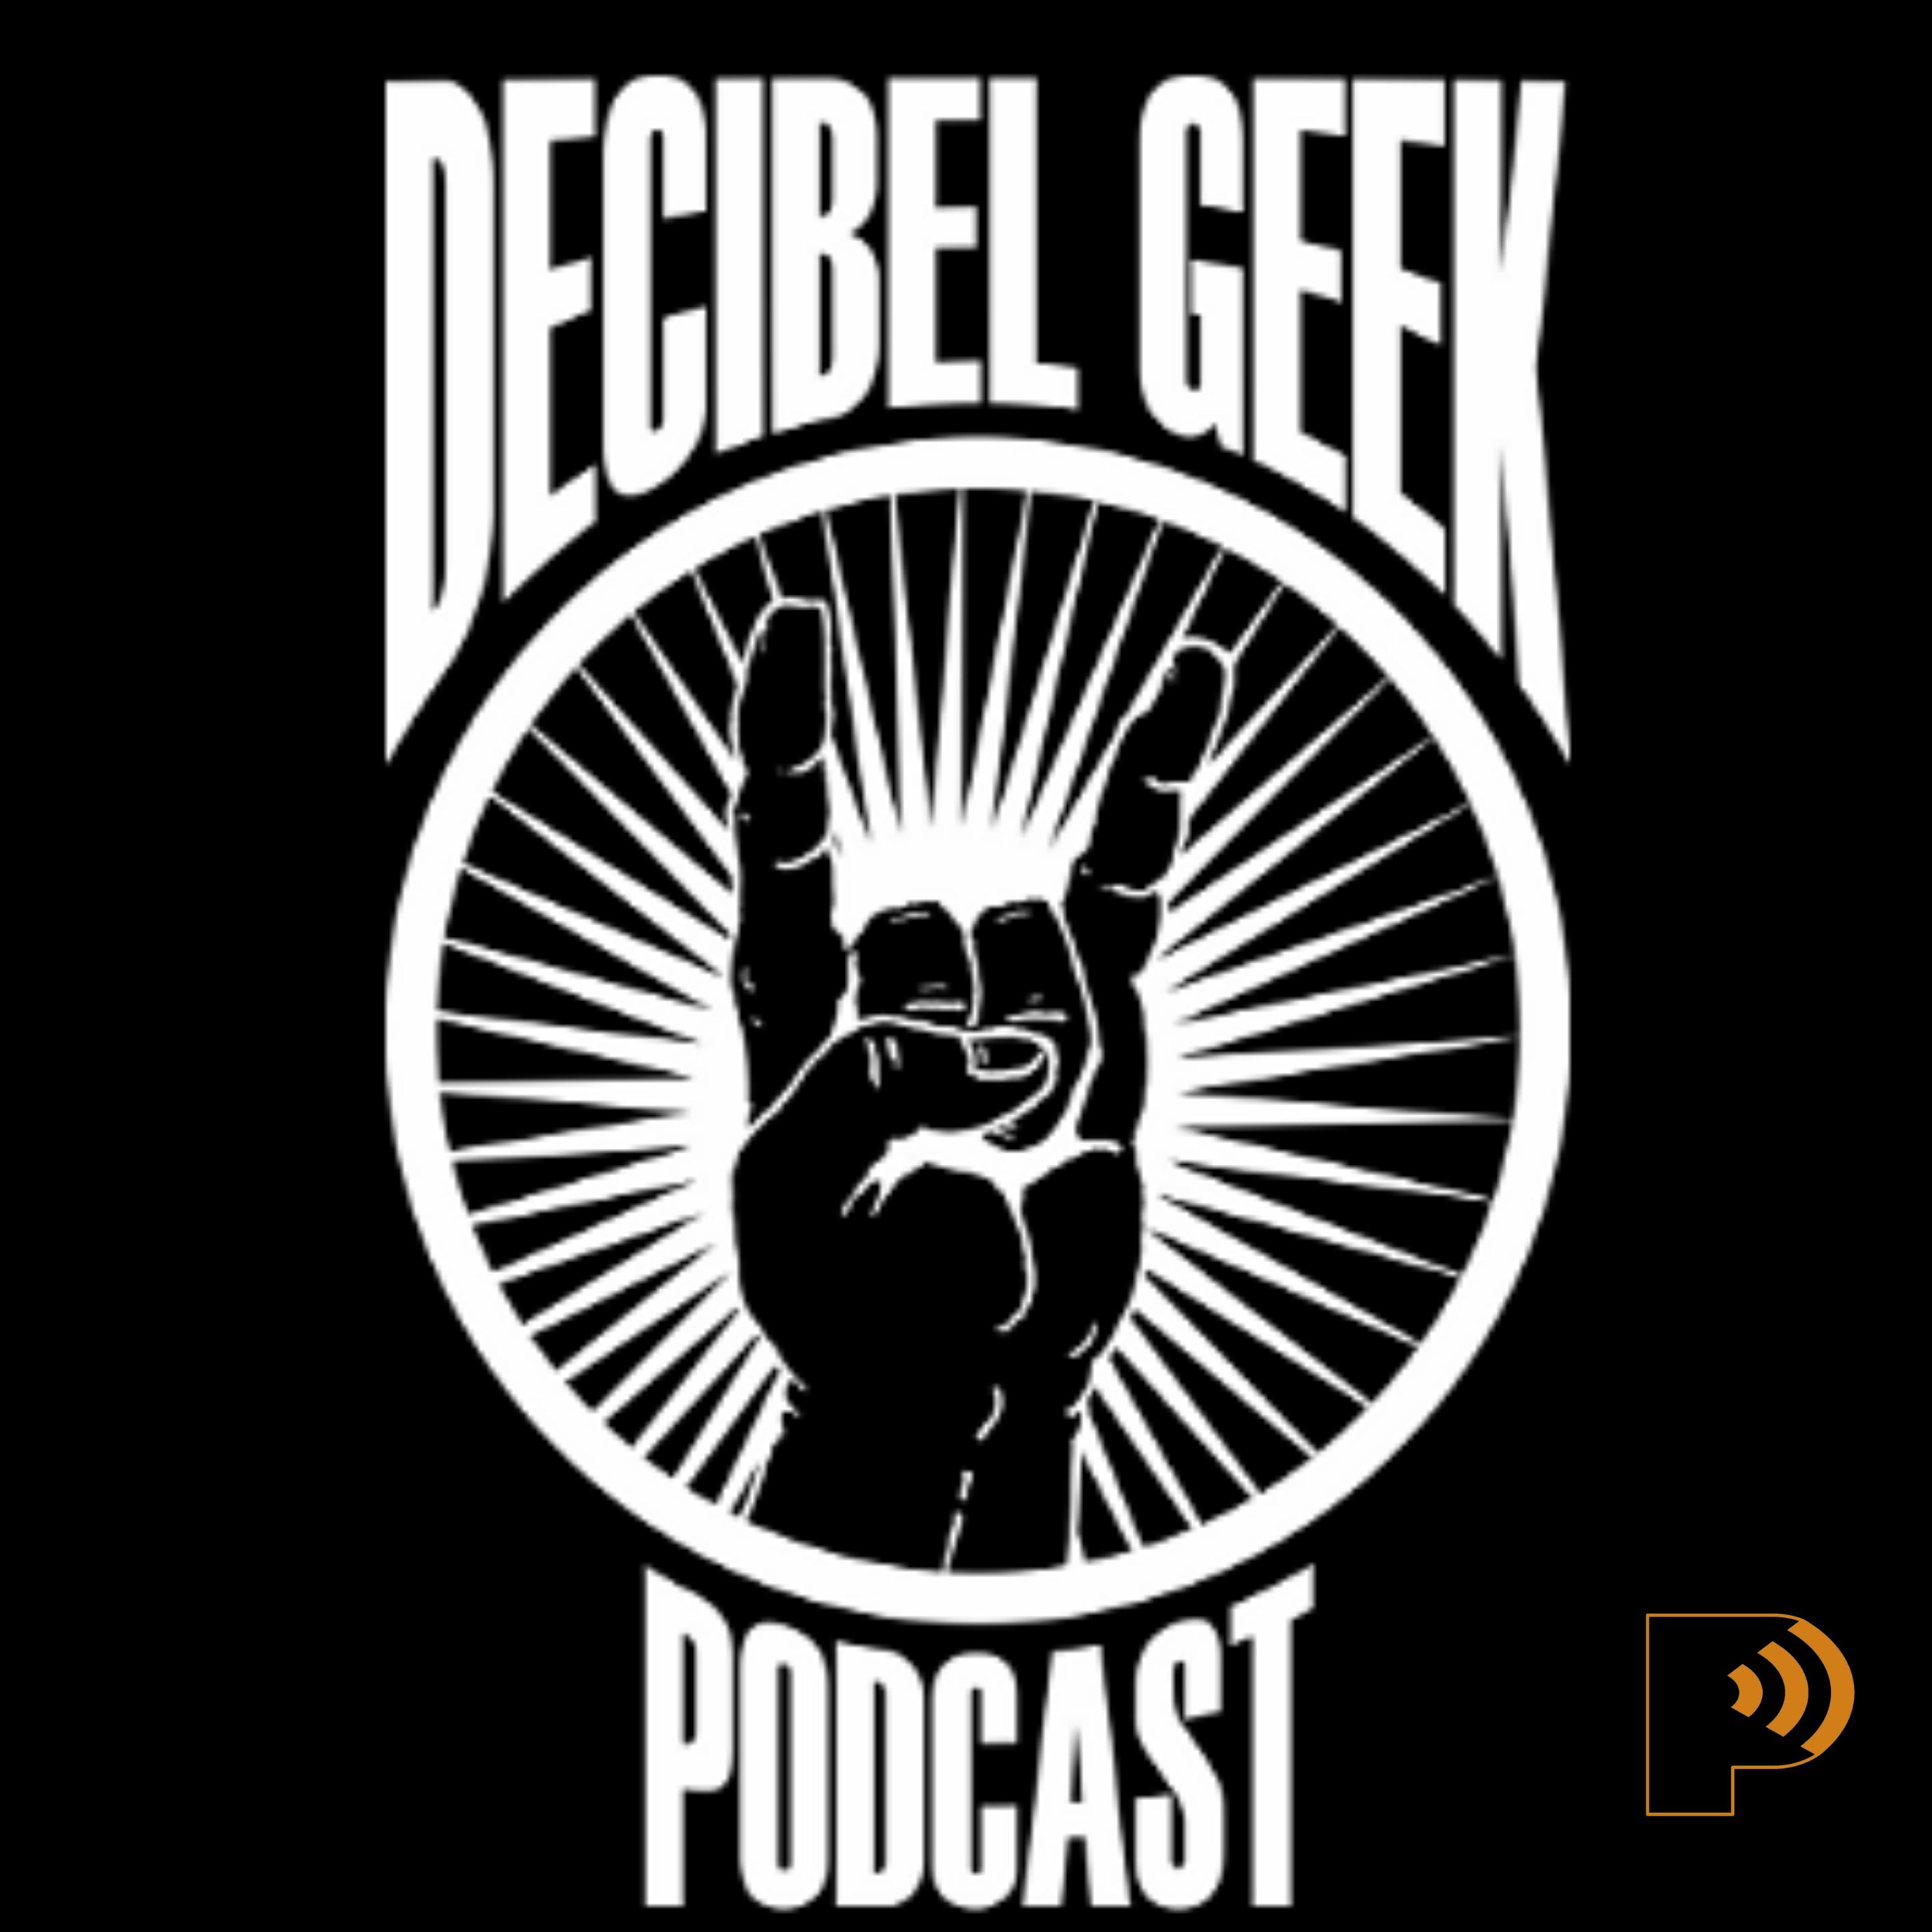 Decibel Geek Podcast - Conversation with Ace Frehley - Ep568